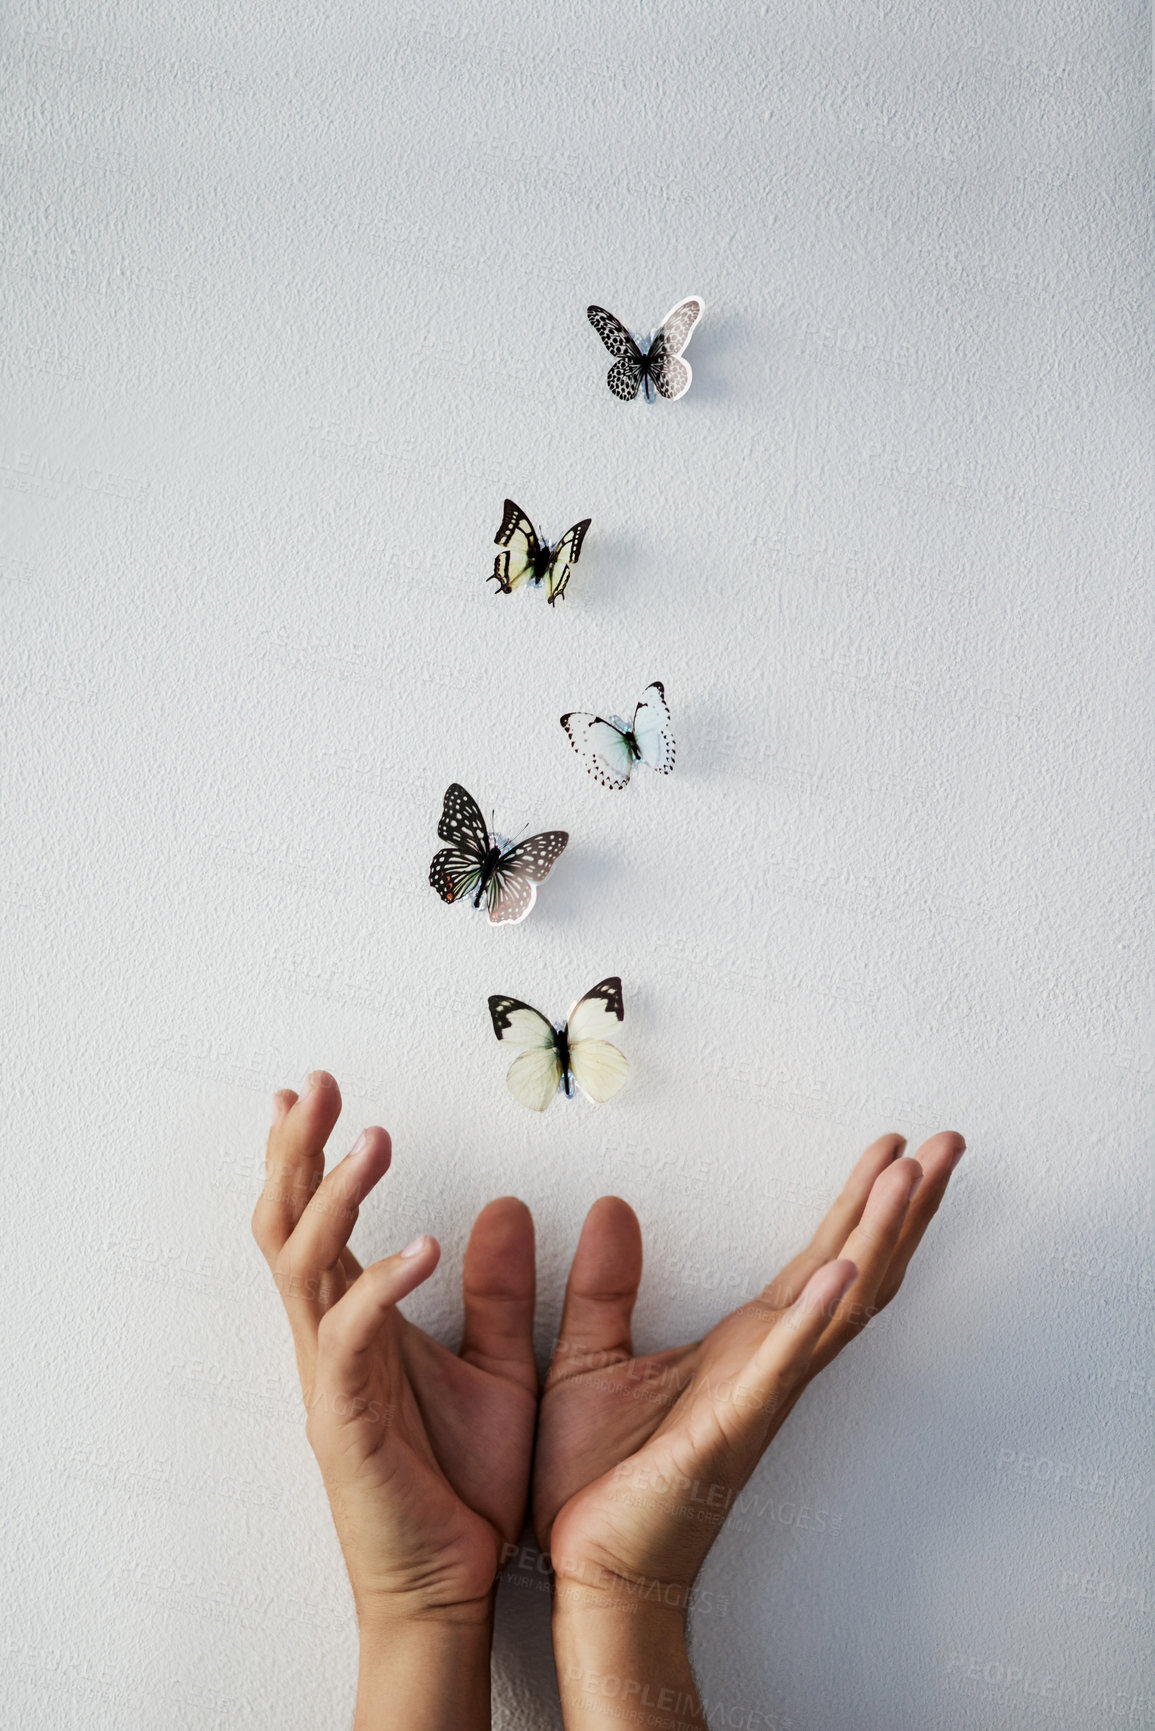 Buy stock photo Studio shot of a unrecognizable persons hand releasing butterflies into the air on a grey background